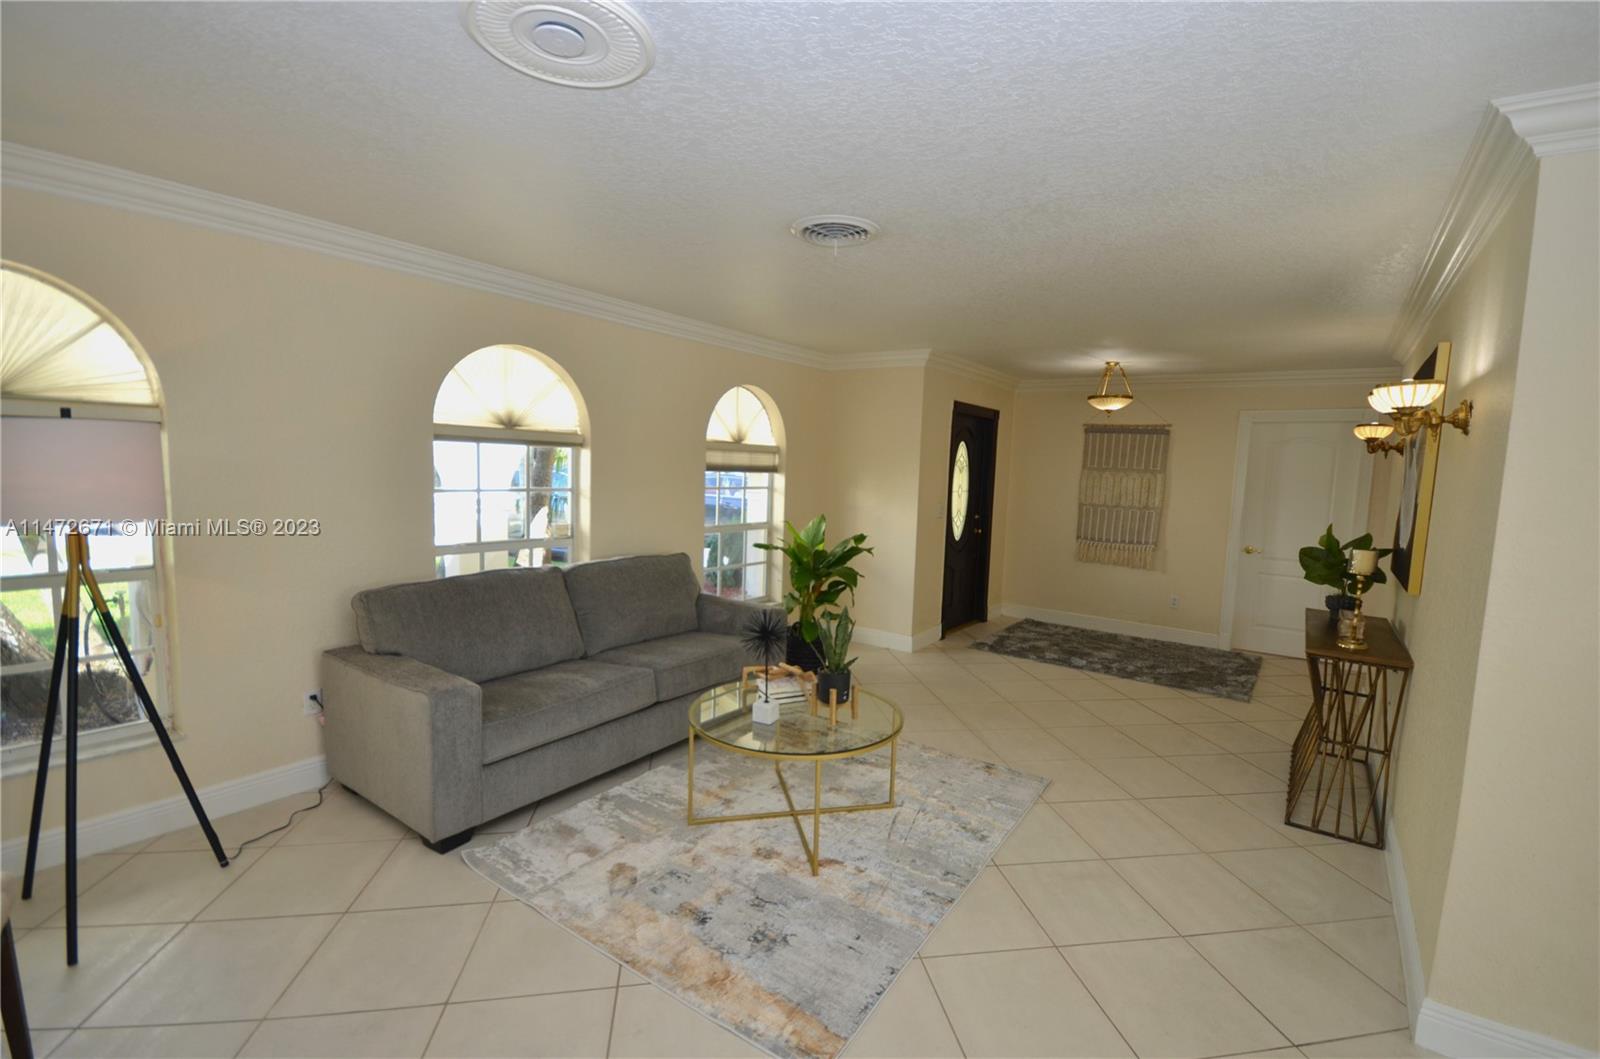 14141 Leaning Pine Dr, Miami Lakes, Florida, 33014, United States, 5 Bedrooms Bedrooms, ,3 BathroomsBathrooms,Residential,For Sale,14141 Leaning Pine Dr,1384790